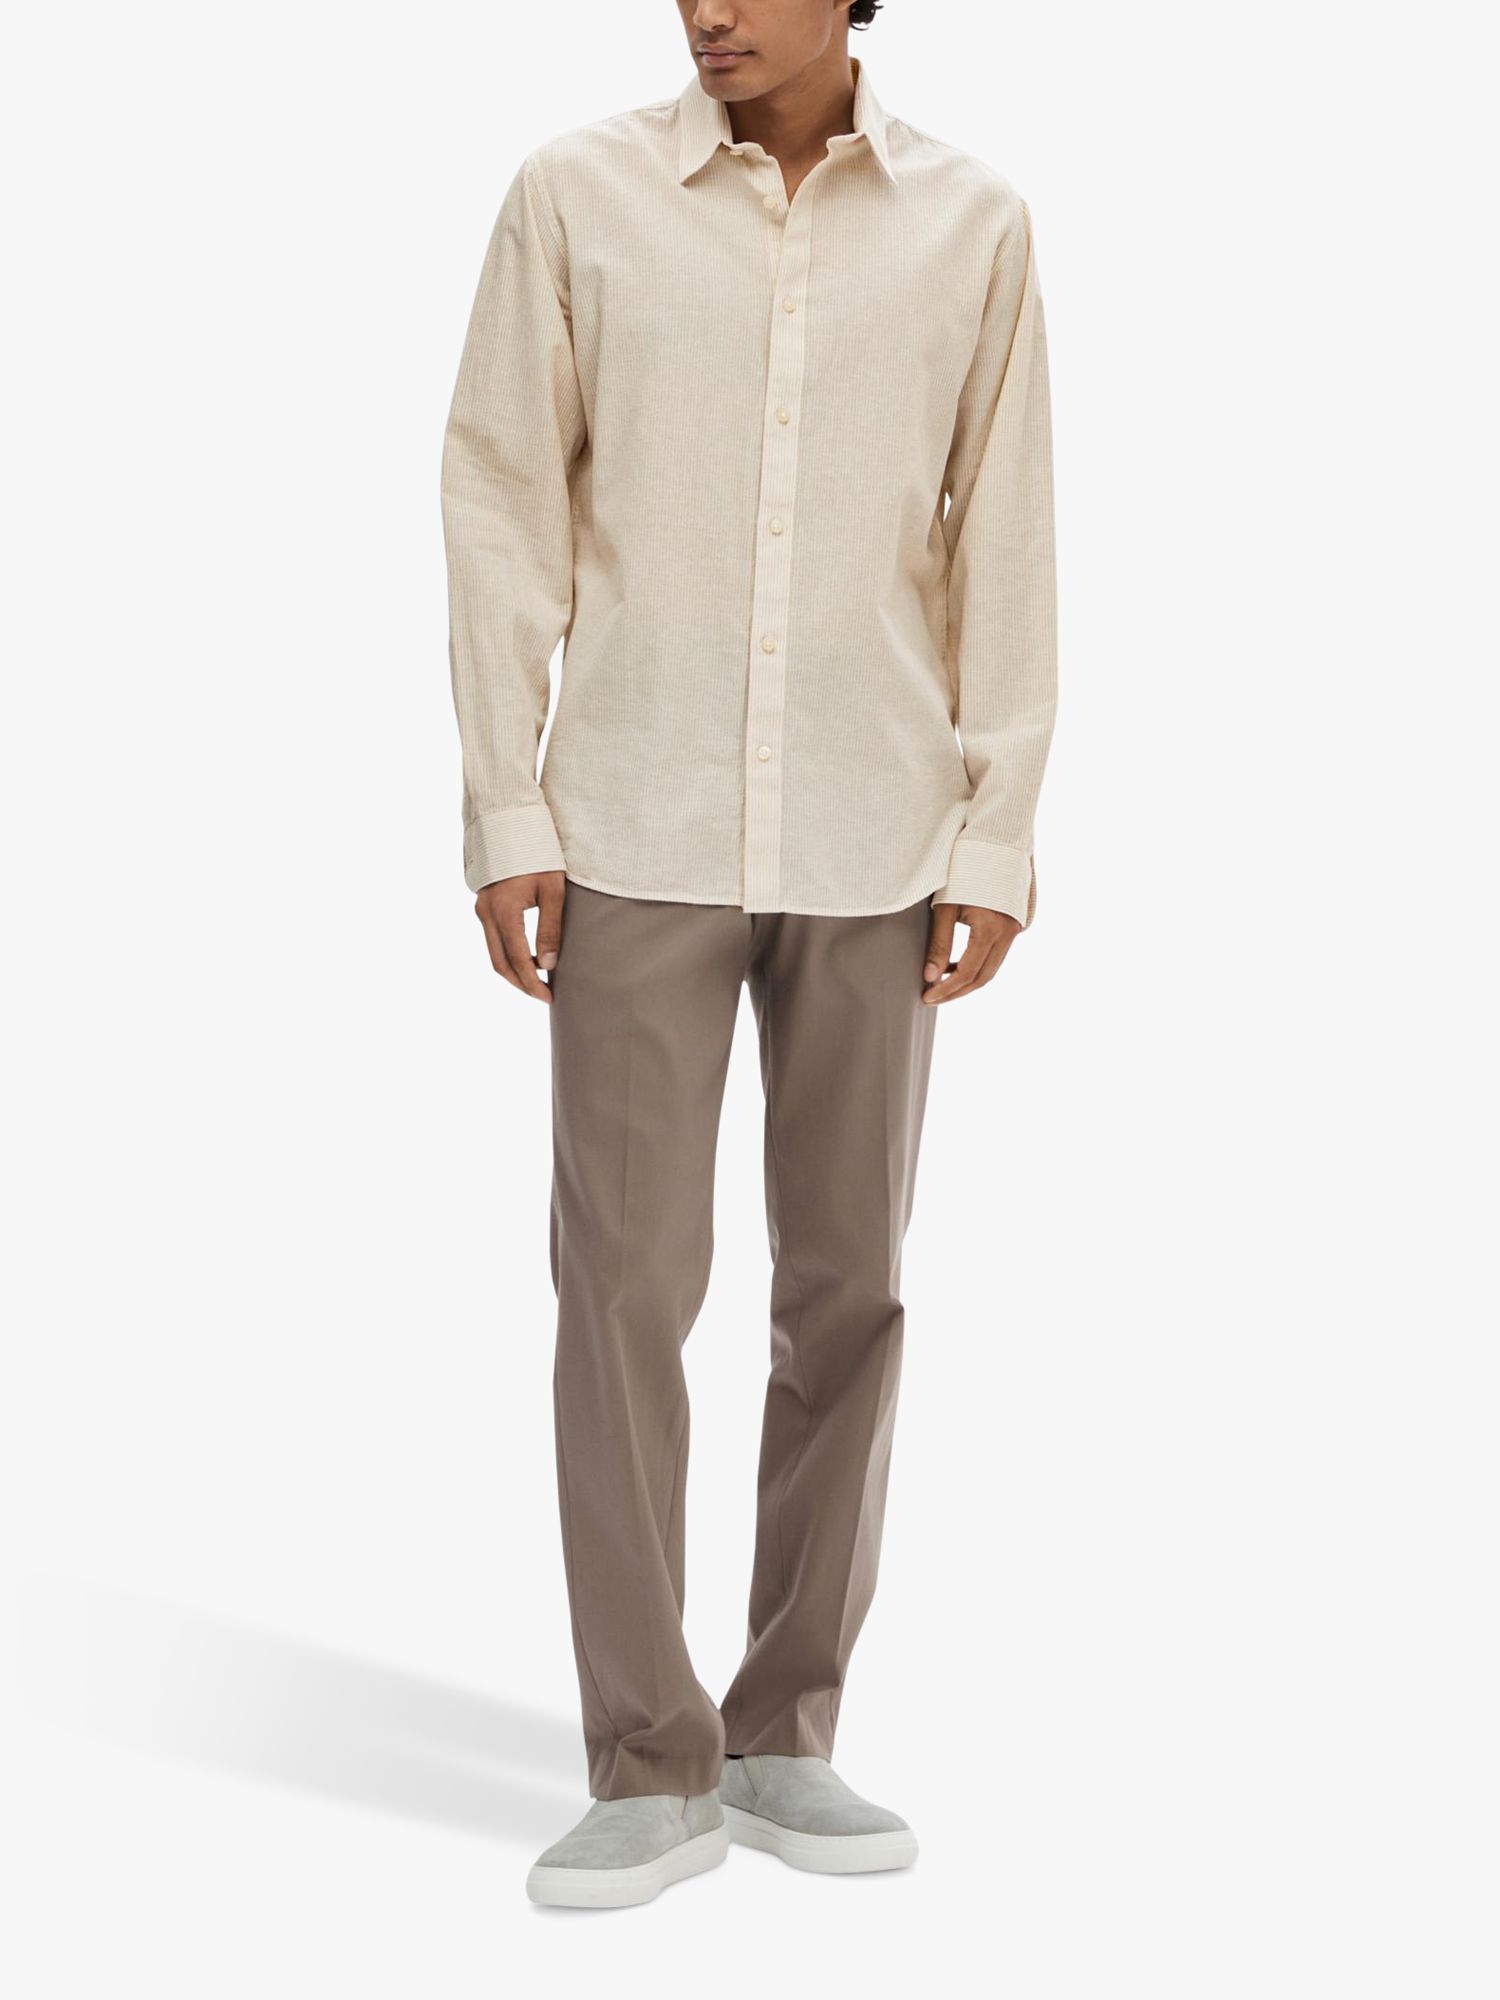 Buy SELECTED HOMME Linen Shirt, Pure Cashmere Online at johnlewis.com